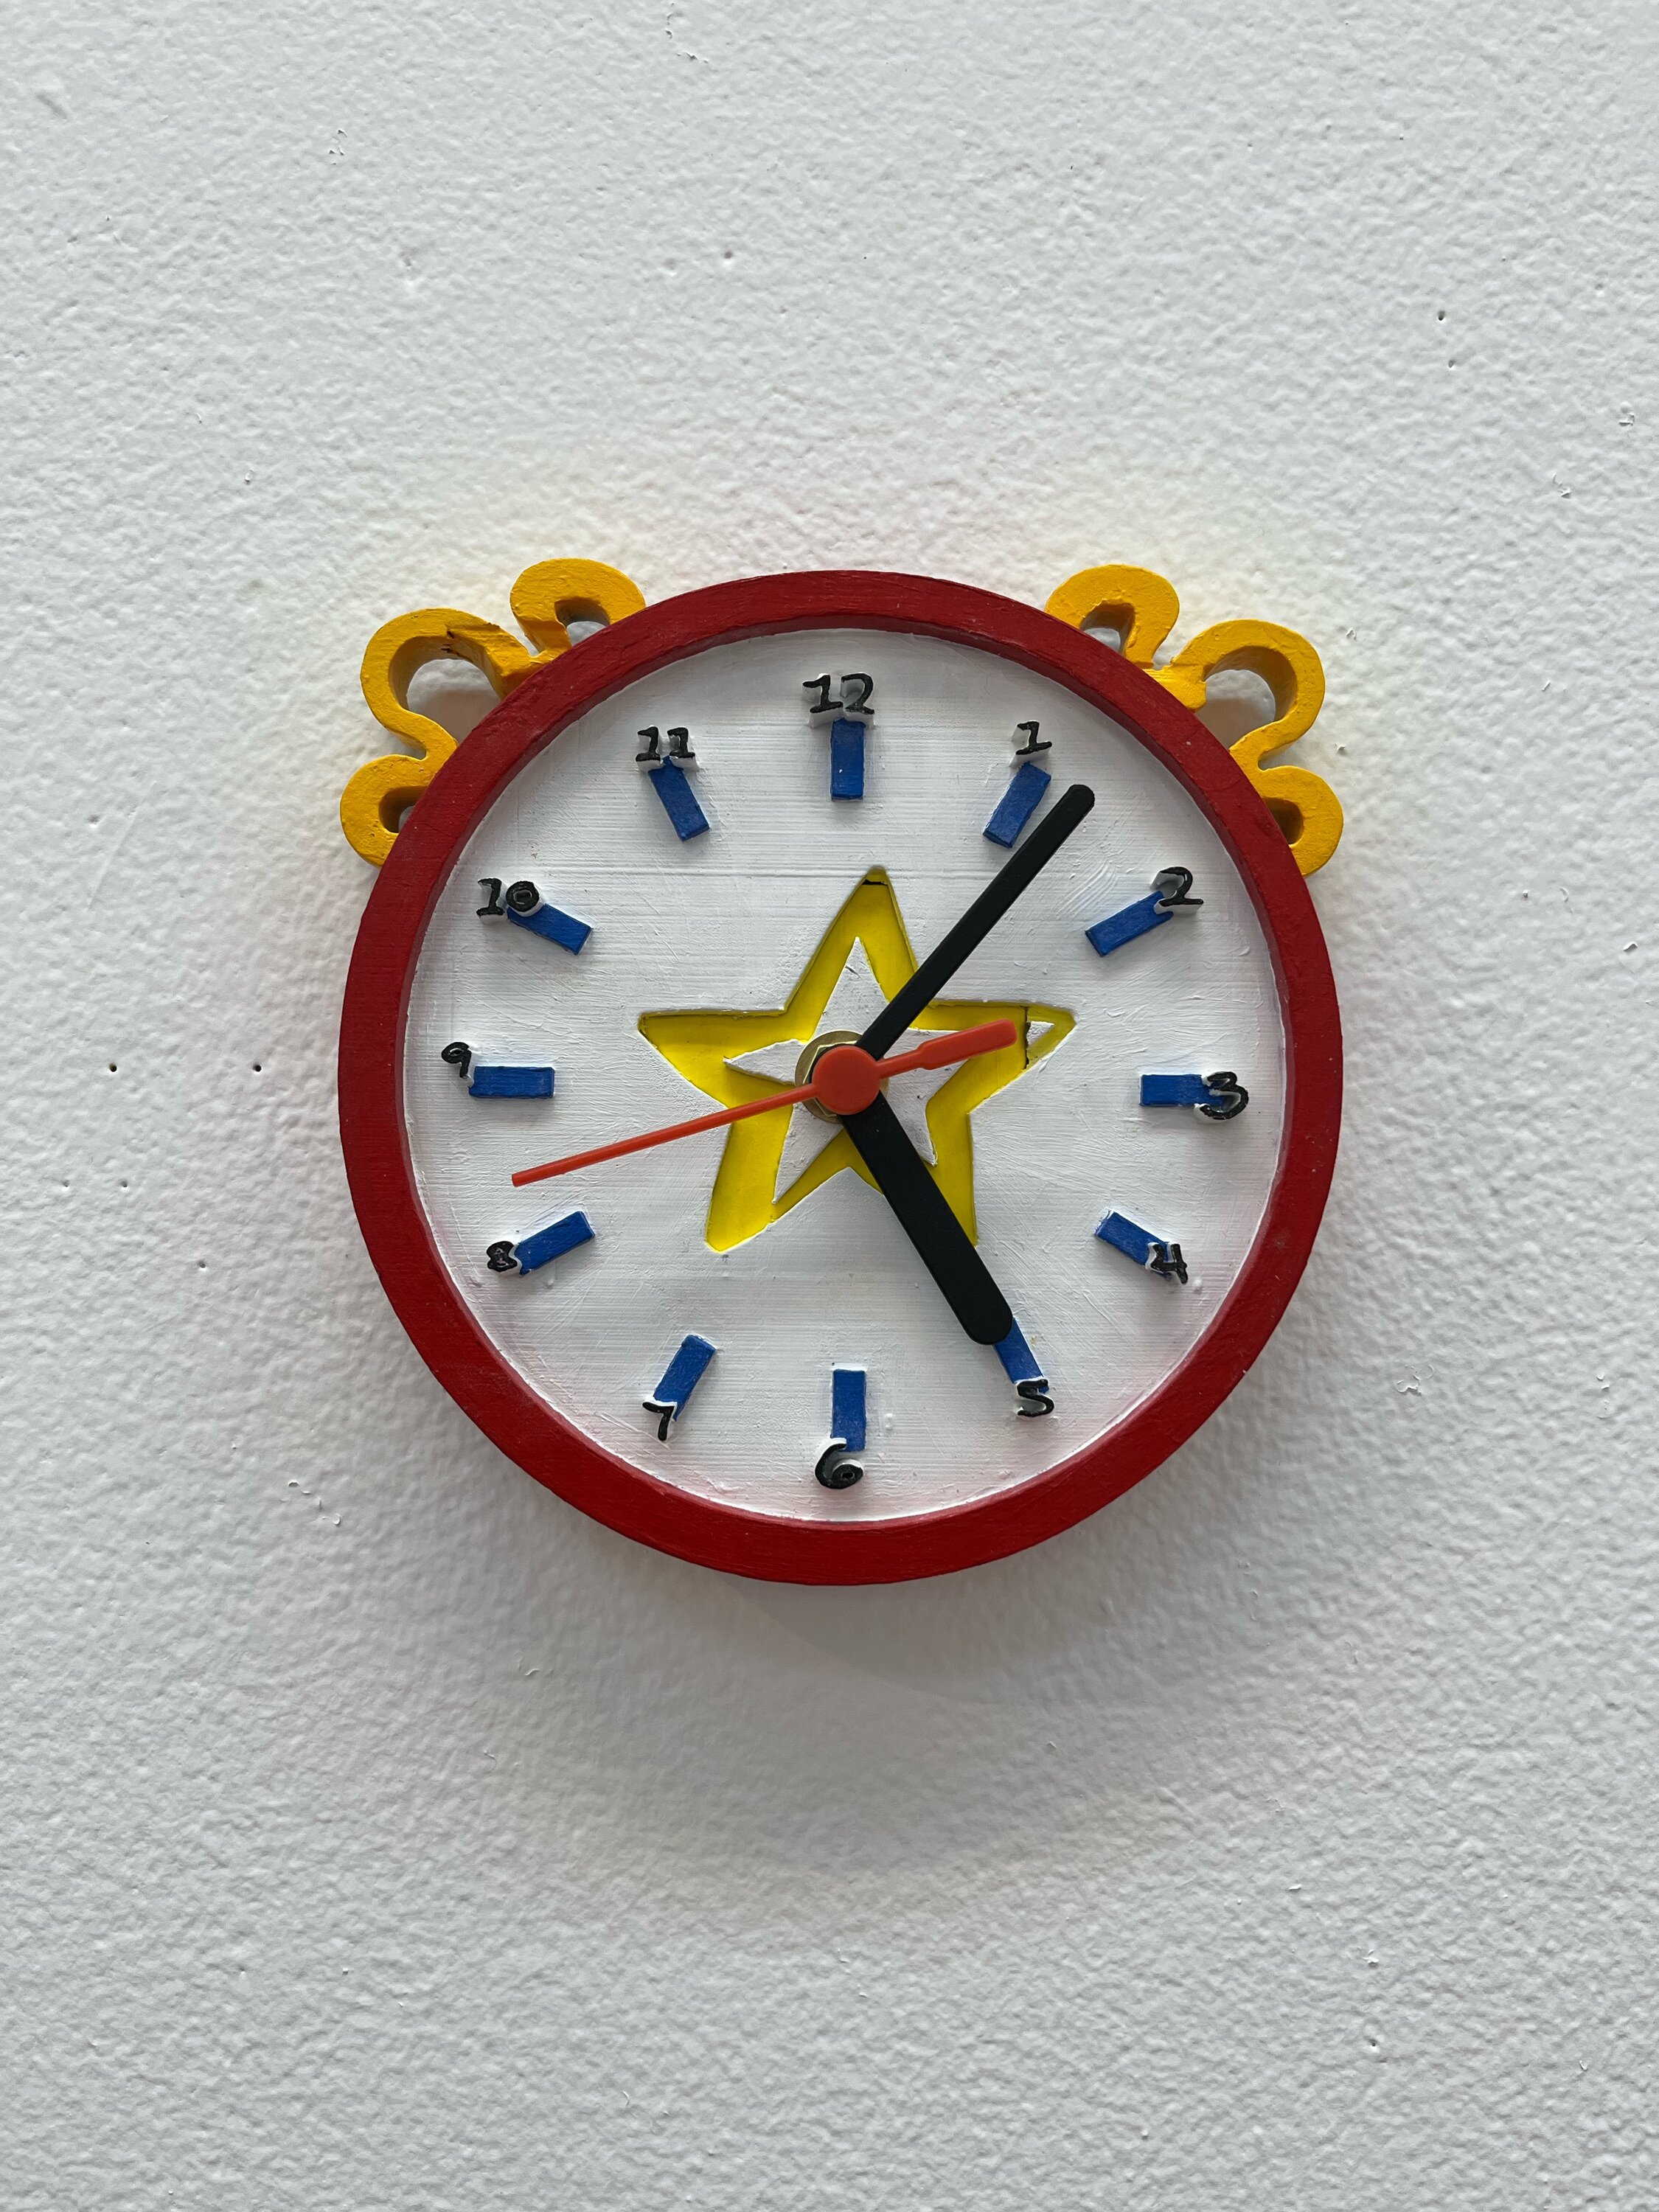 A red, blue and yellow clock with a star in the middle